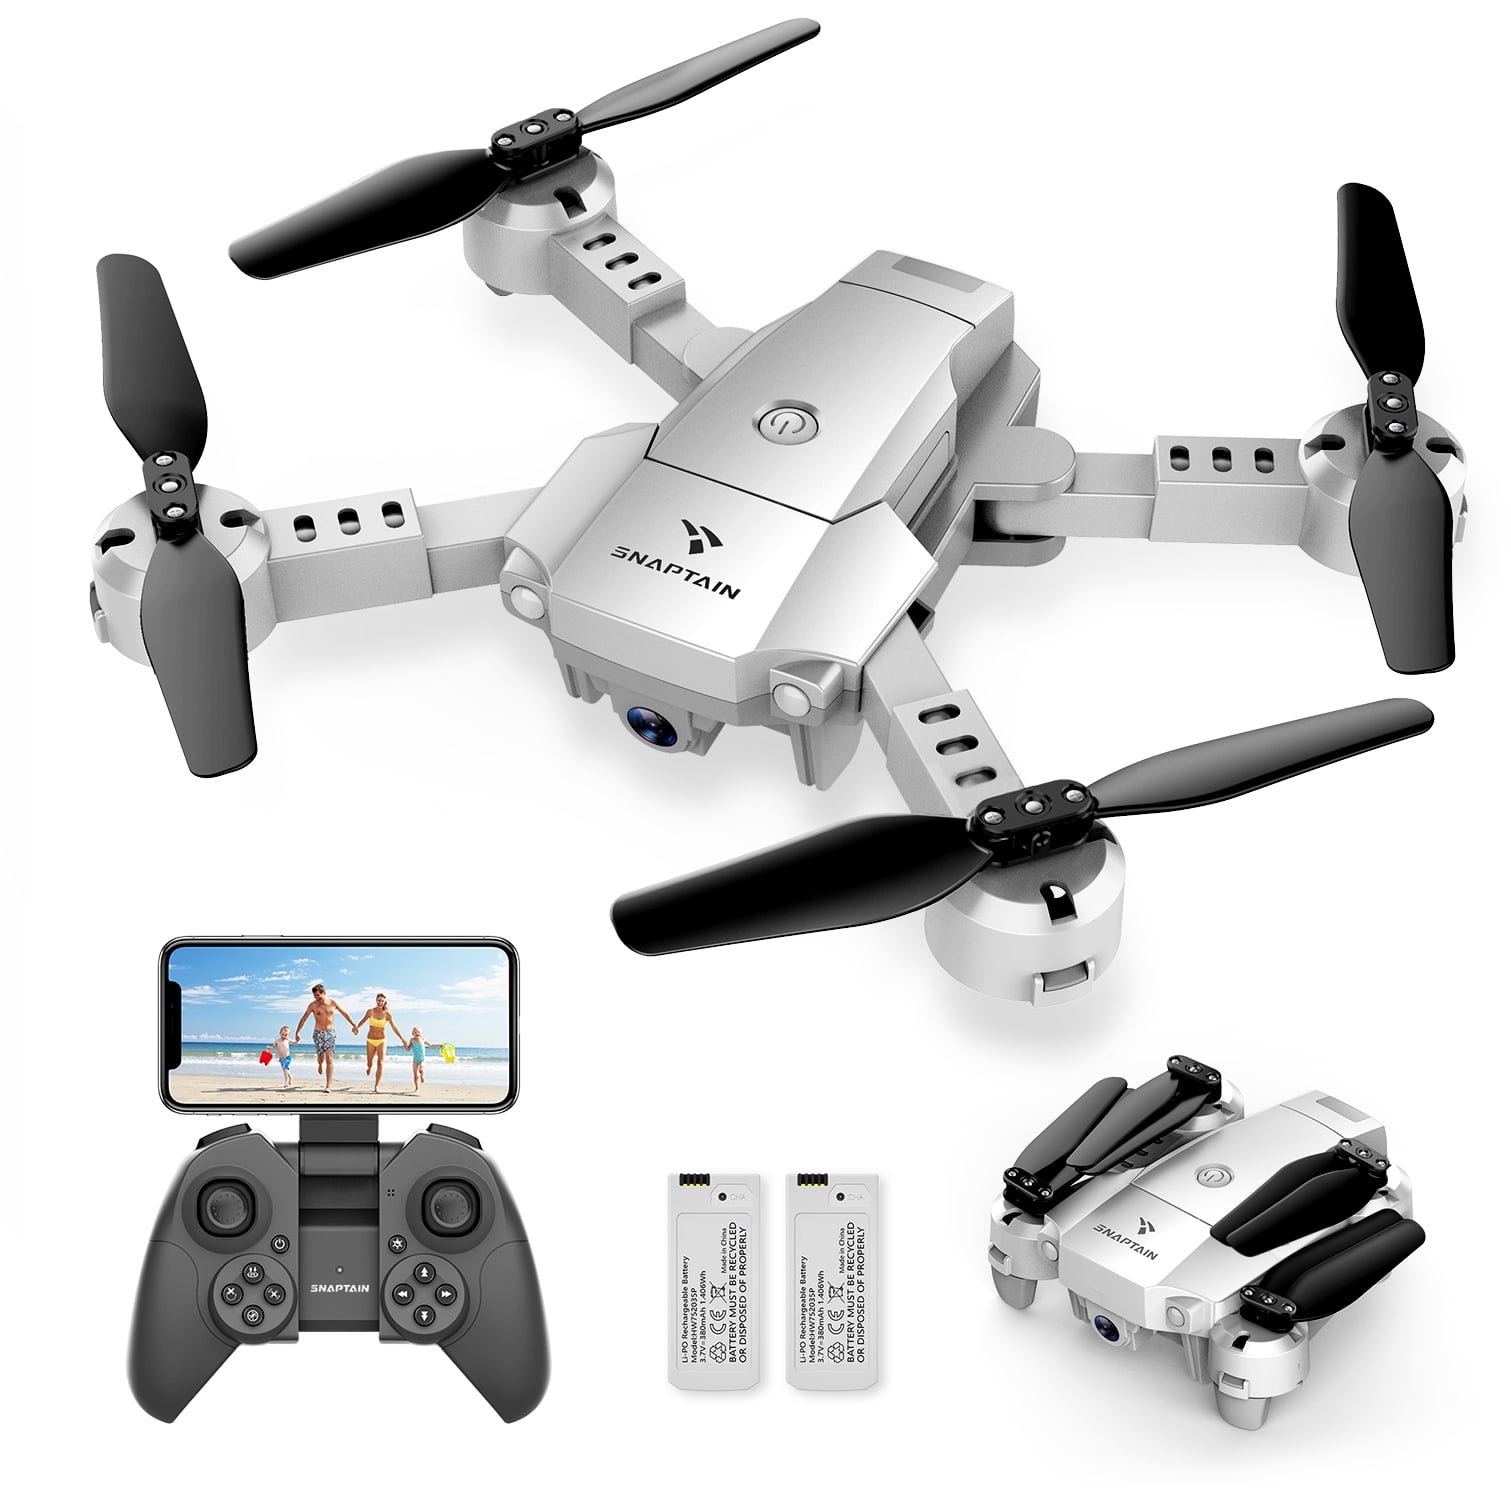 Best Drone for Beginners with Altitude 3D SNAPTAIN S5C WiFi FPV 720P HD Camera 